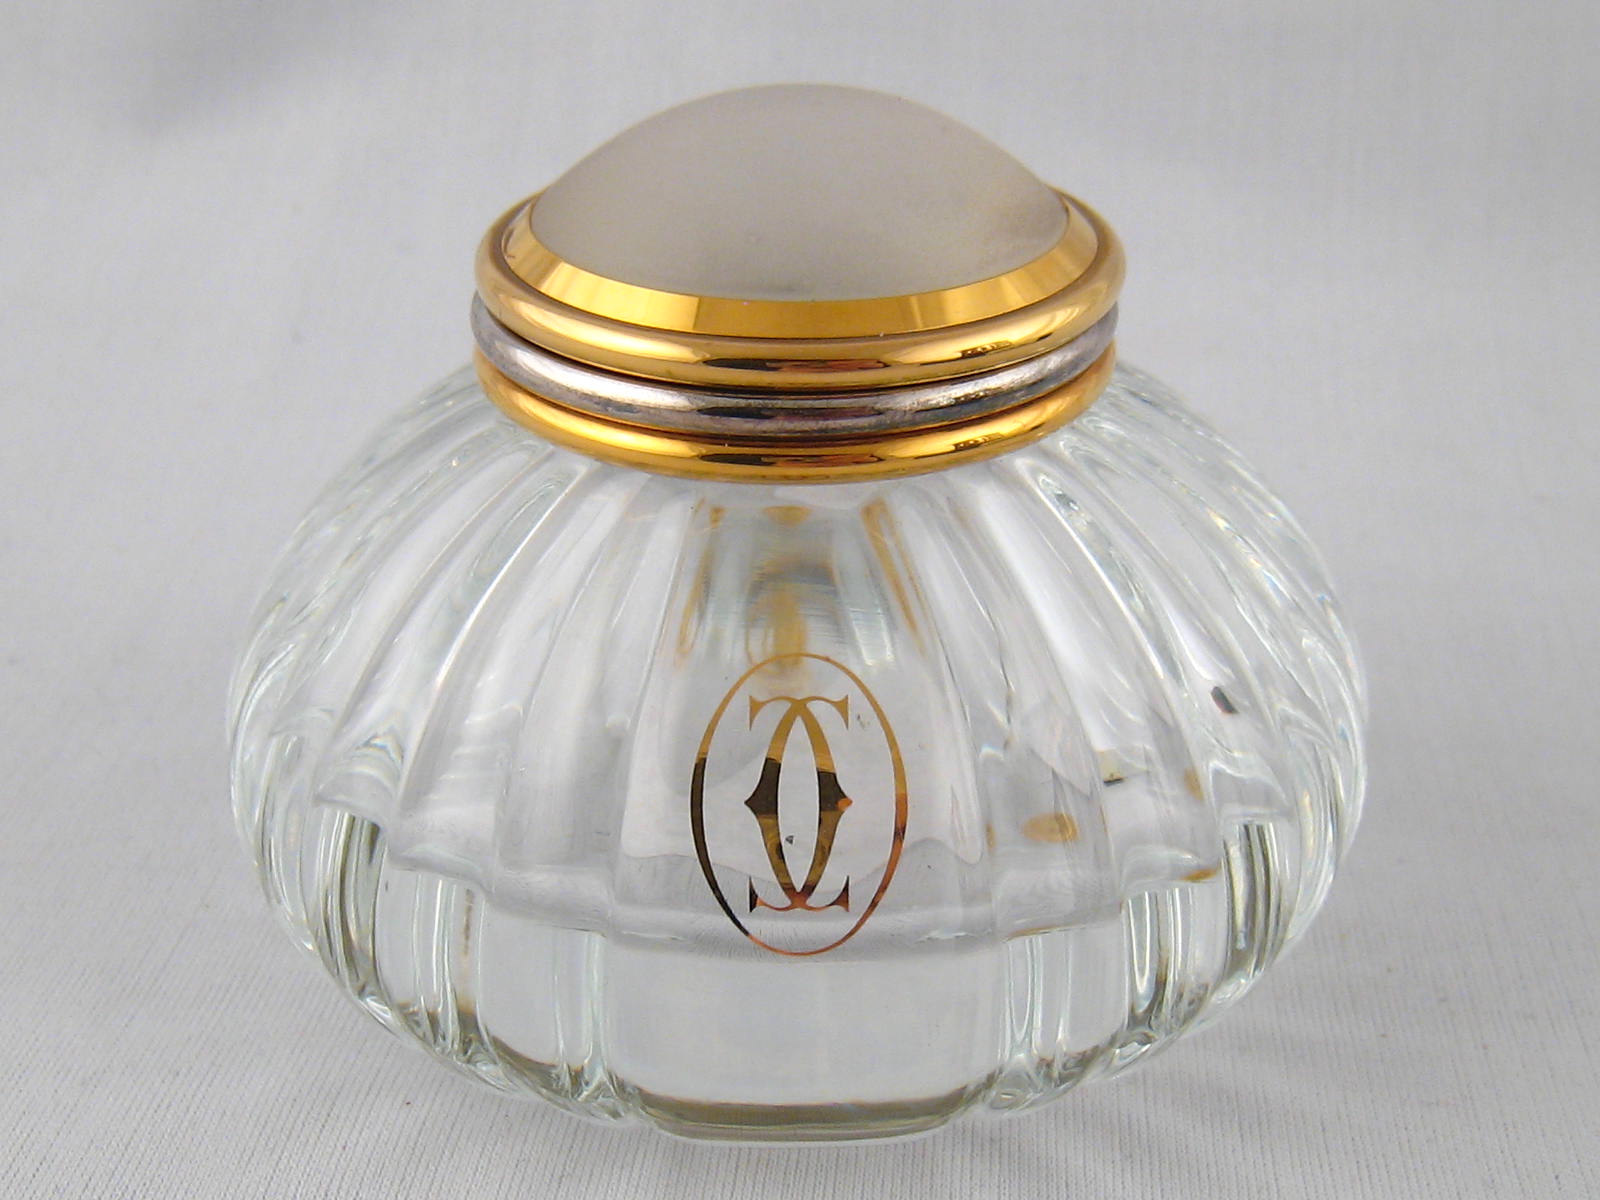 A Must de Cartier inkwell, numbered 017909, 1989, with ribbed glass body and gilt mount.